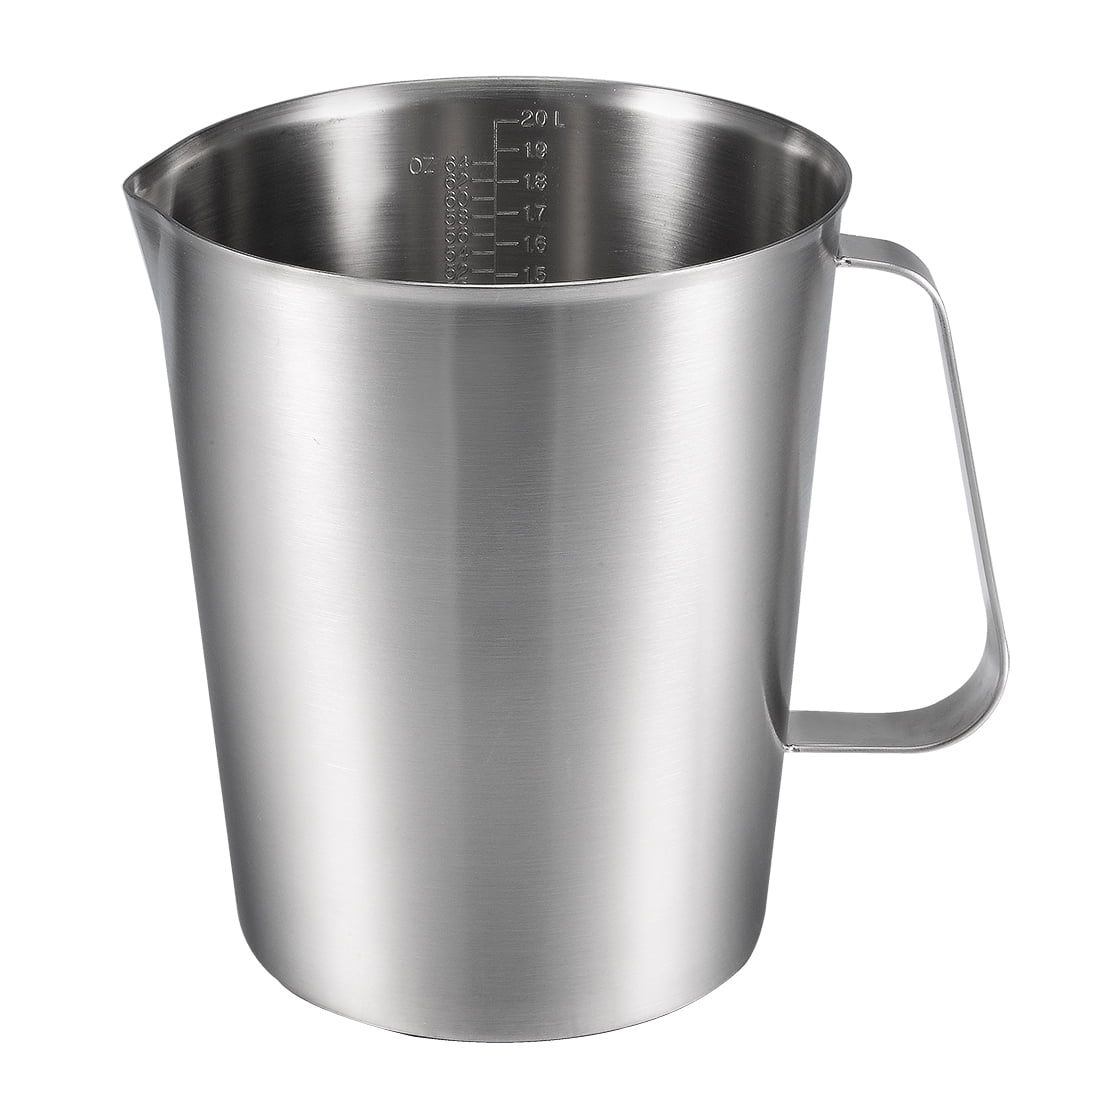 HUBERT® Stainless Steel Measuring Cup Set with Heavy Wire